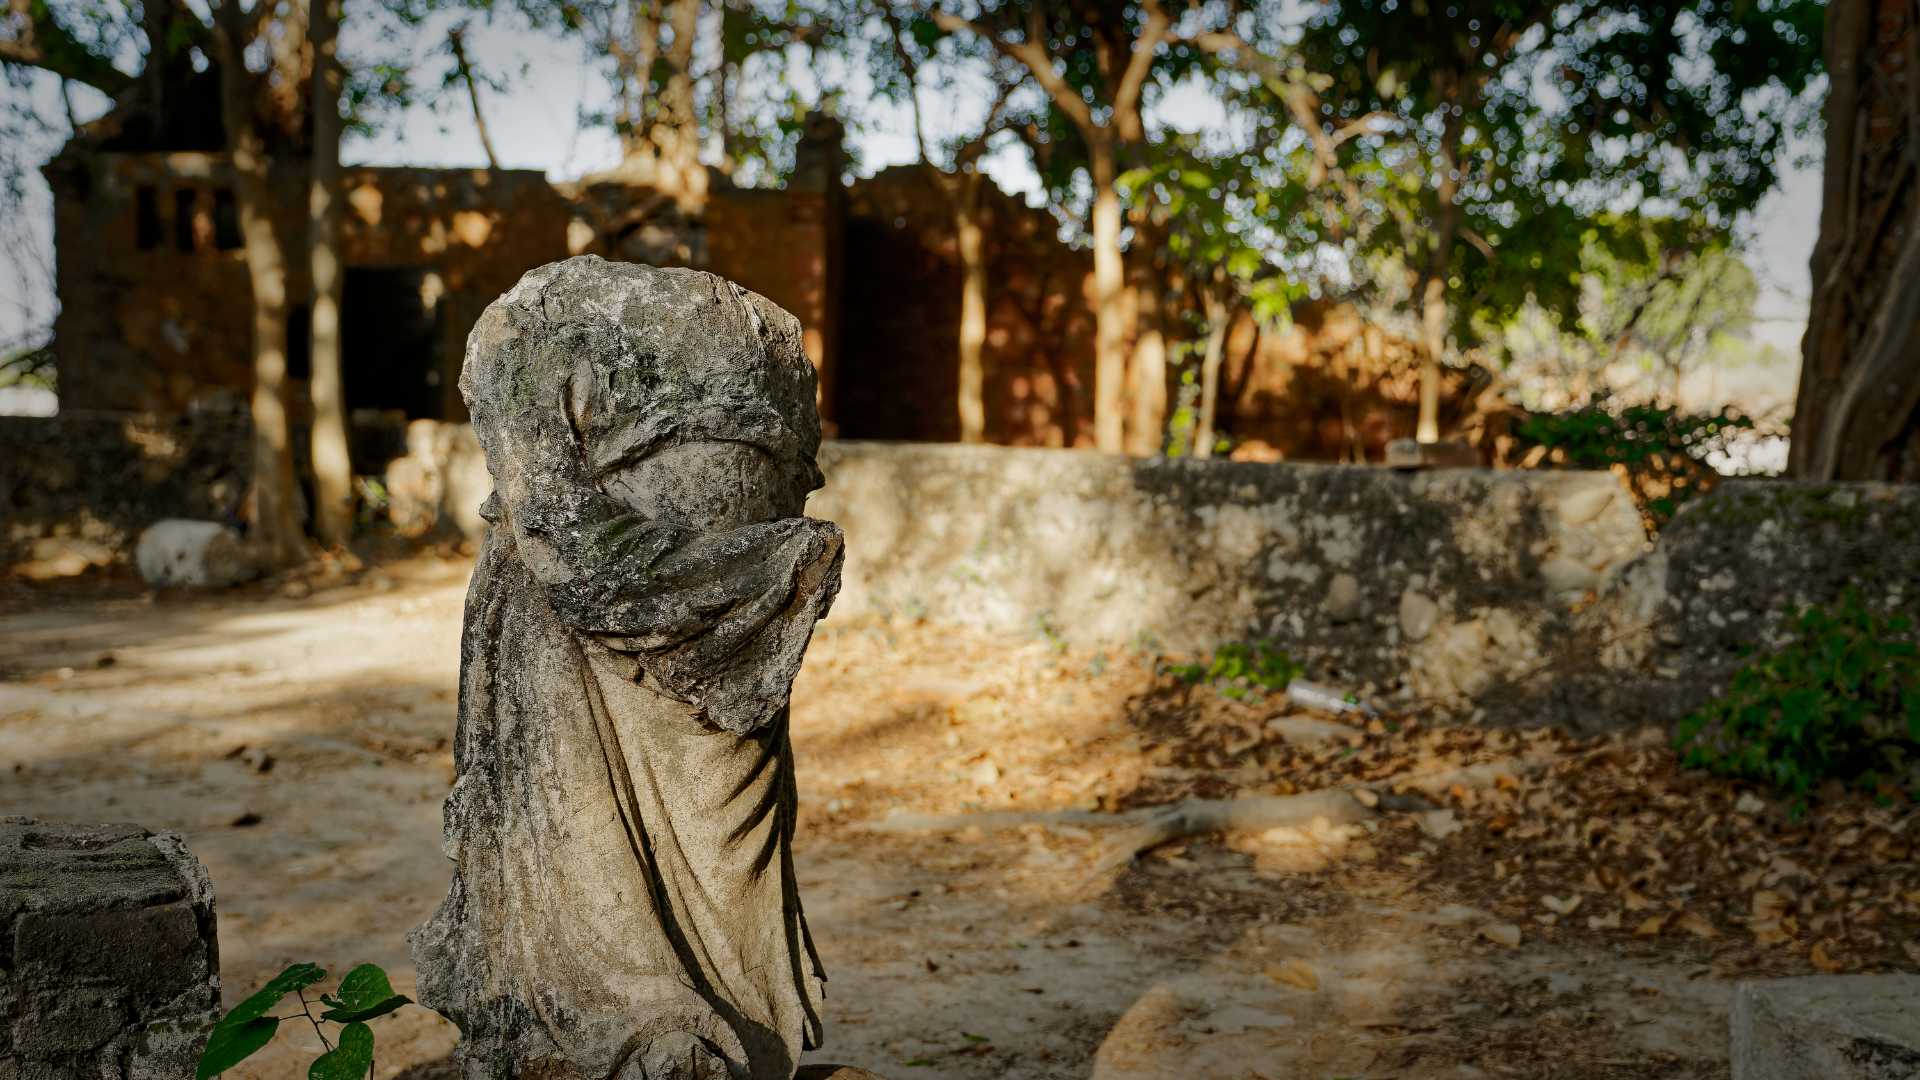 A deteriorating stone statue of a woman draped in a long dress, without a head, on the grounds of Minxiong Haunted House. A brick ruin is out of focus in the background.